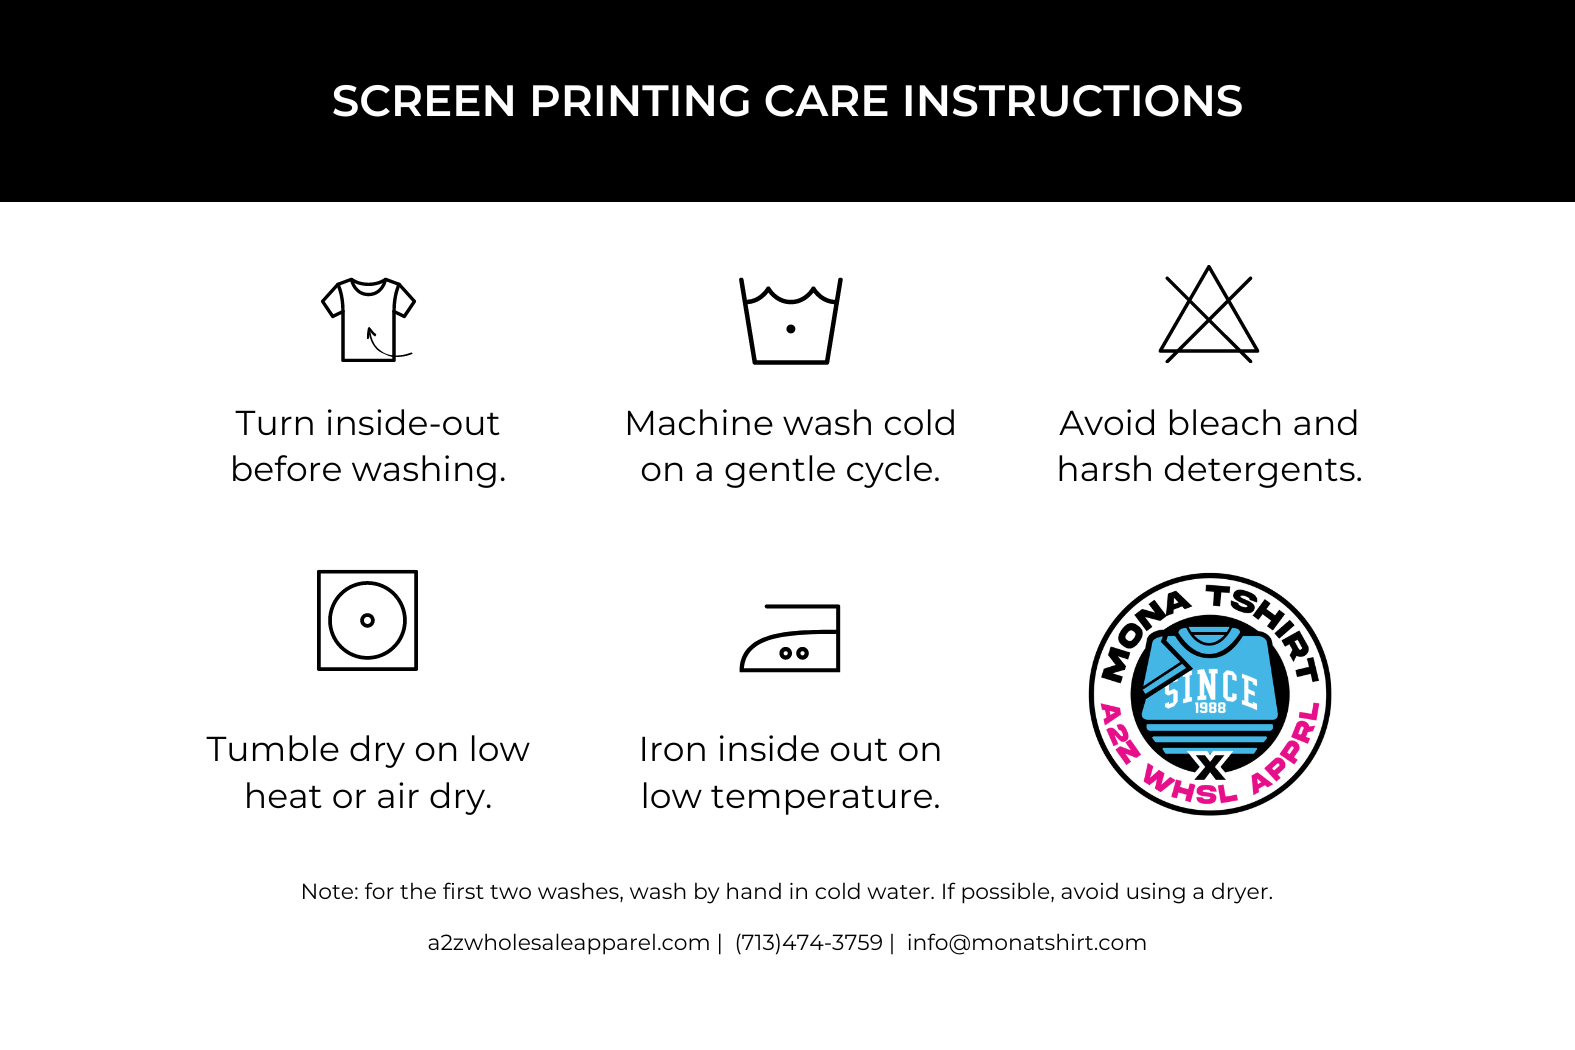 Screen printing apparel care instructions